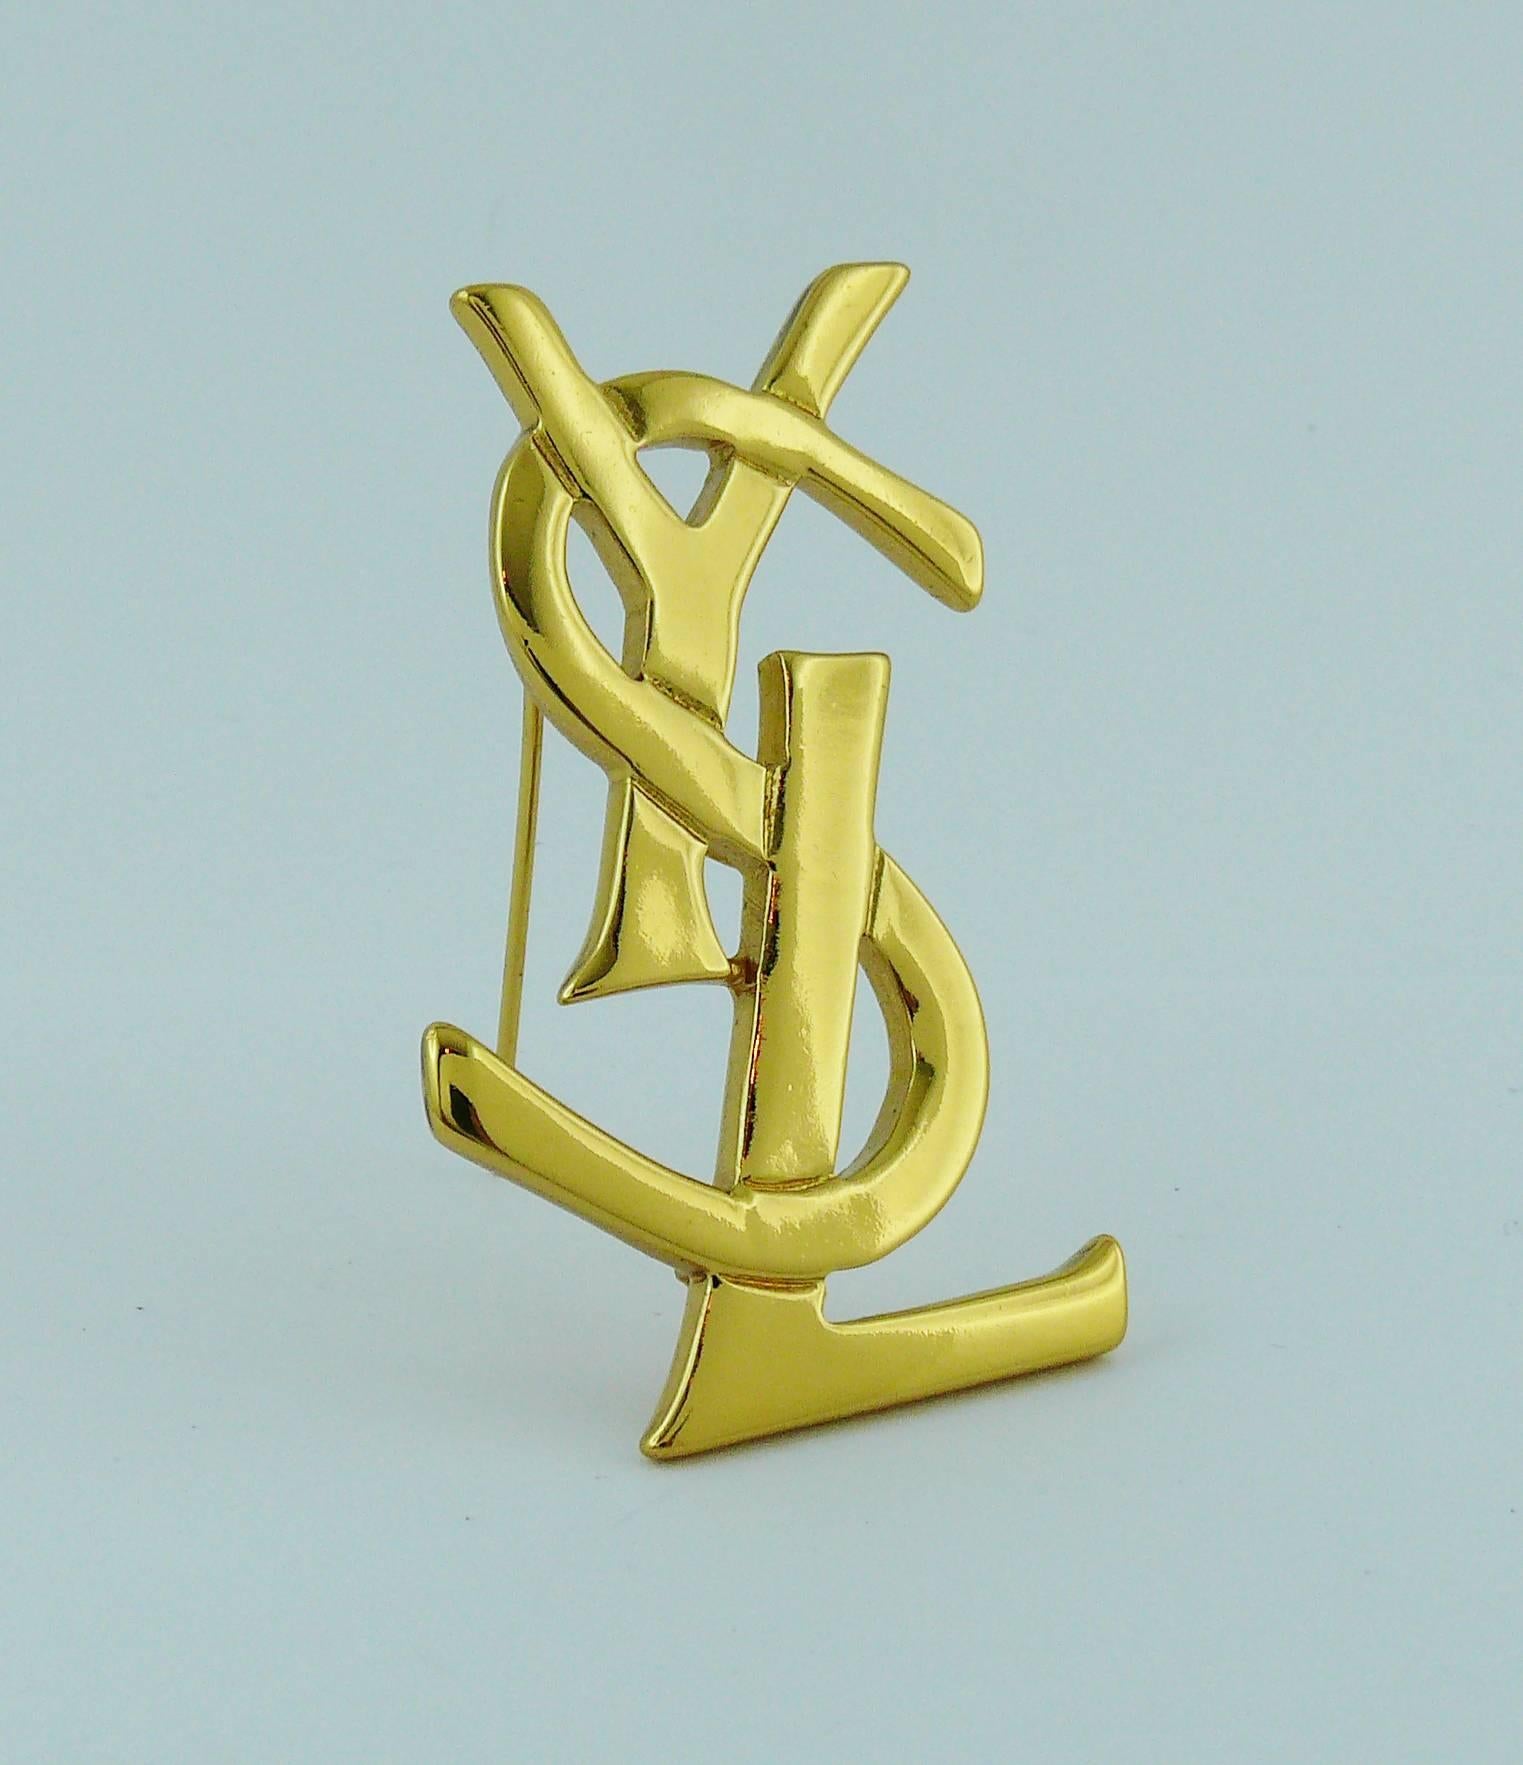 YVES SAINT LAURENT gold toned logo brooch.

Embossed Made in France.
Numbered E4.

Indicative measurements : max. height approx. 5.2 cm (2.05 inches) / max. width approx. 3.2 cm (1.26 inches).

JEWELRY CONDITION CHART
- New or never worn : item is